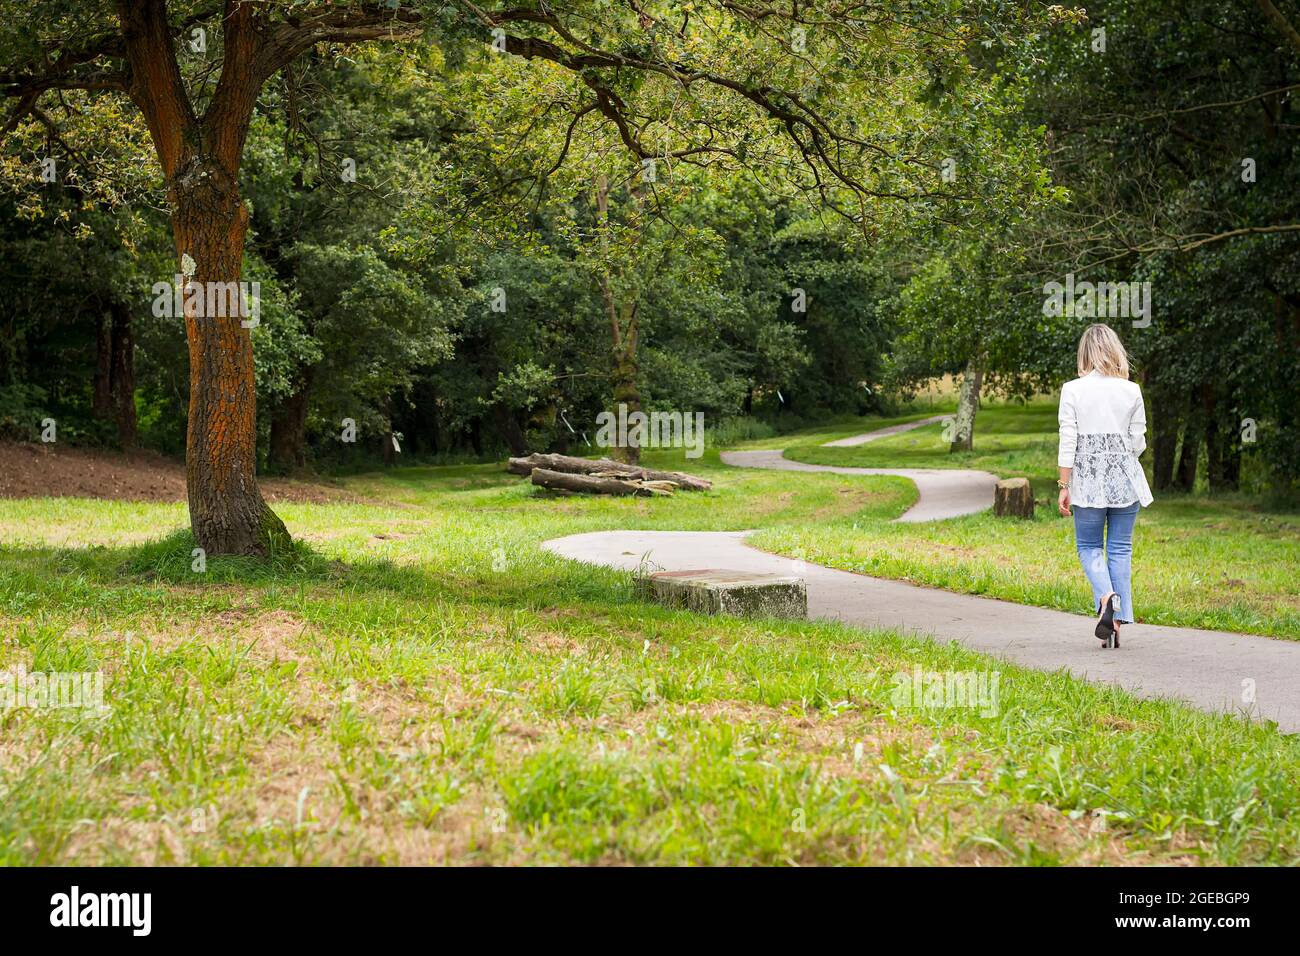 Girl walking with her back to the camera in jeans and a white jacket on a path in a park in Asturias, Spain.Photography taken in horizontal format on Stock Photo